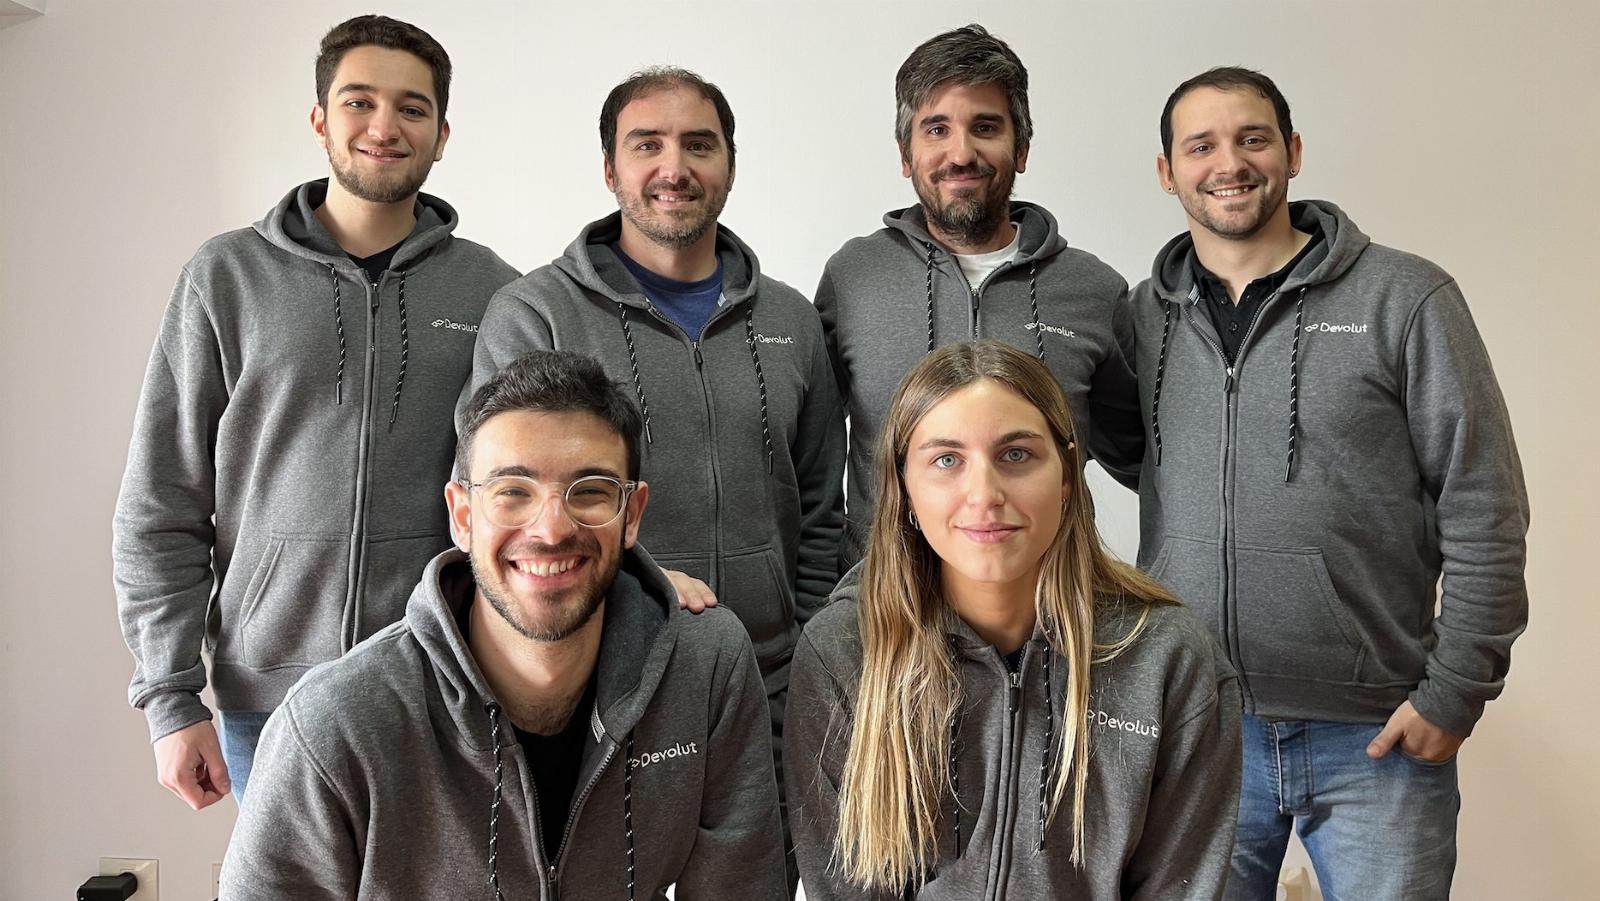 Devolut leverages e-commerce growth in Latin America to develop reverse logistics tool